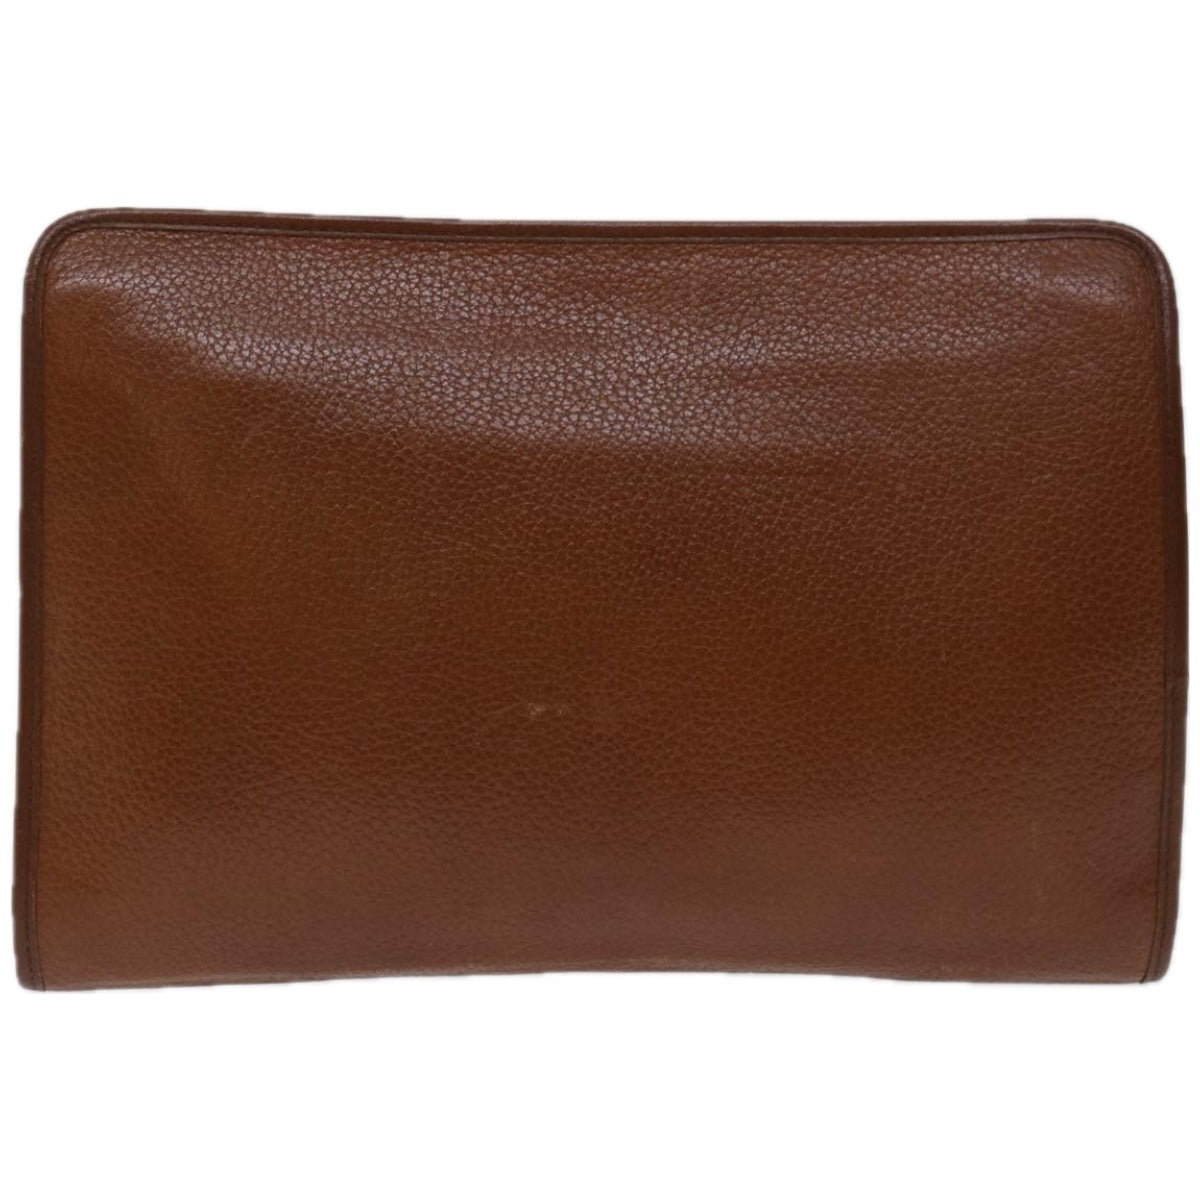 Burberrys Clutch Bag Leather Brown Auth bs12490